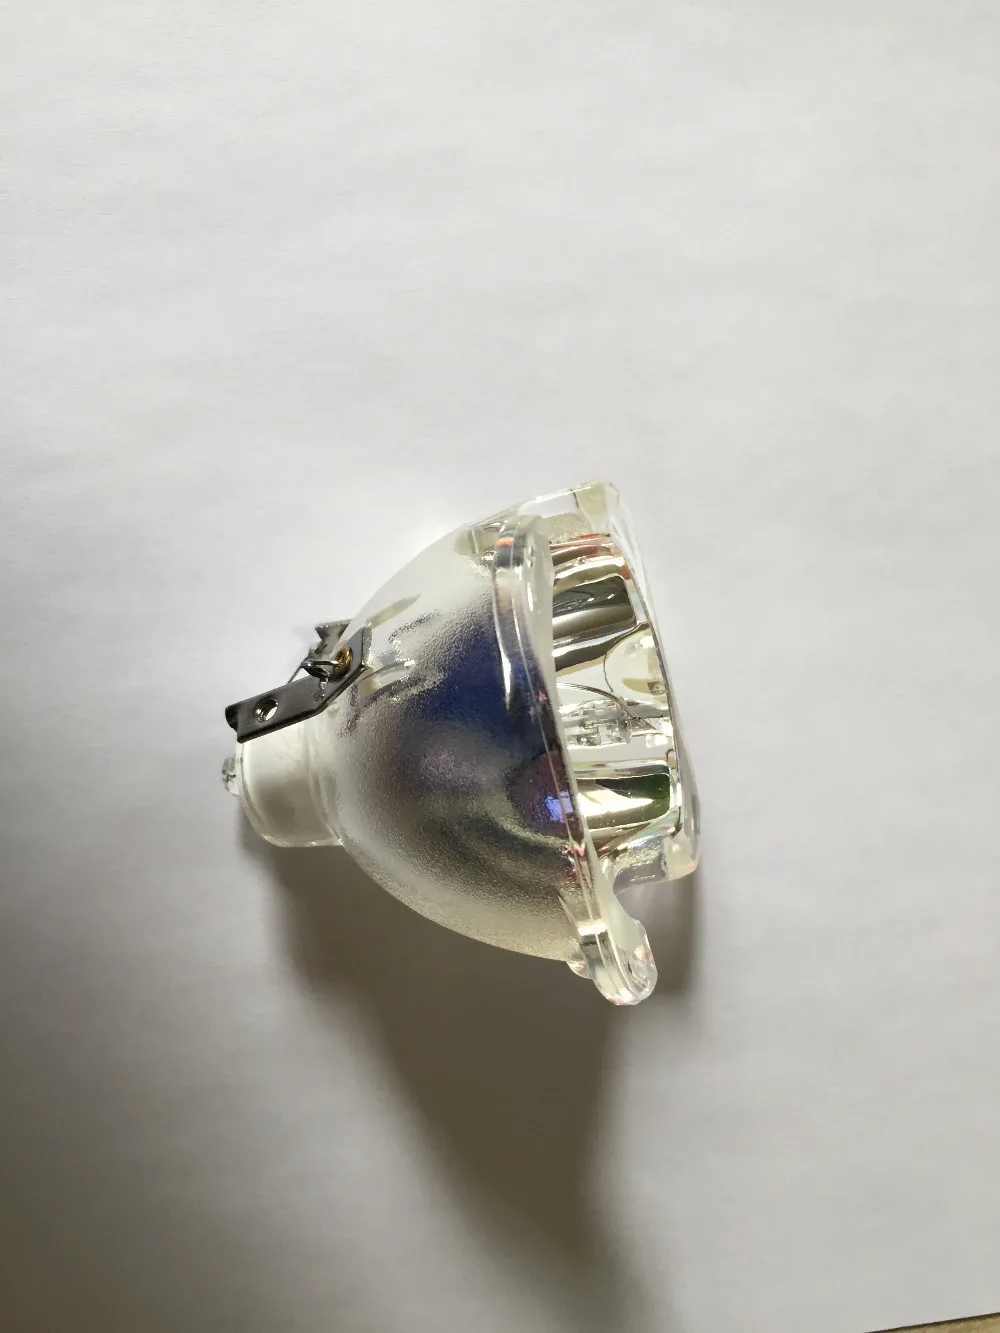 Replacement bare lamp 5J.JC705.001  For BenQ  PU9730, PW9620, PX9710  Projectors